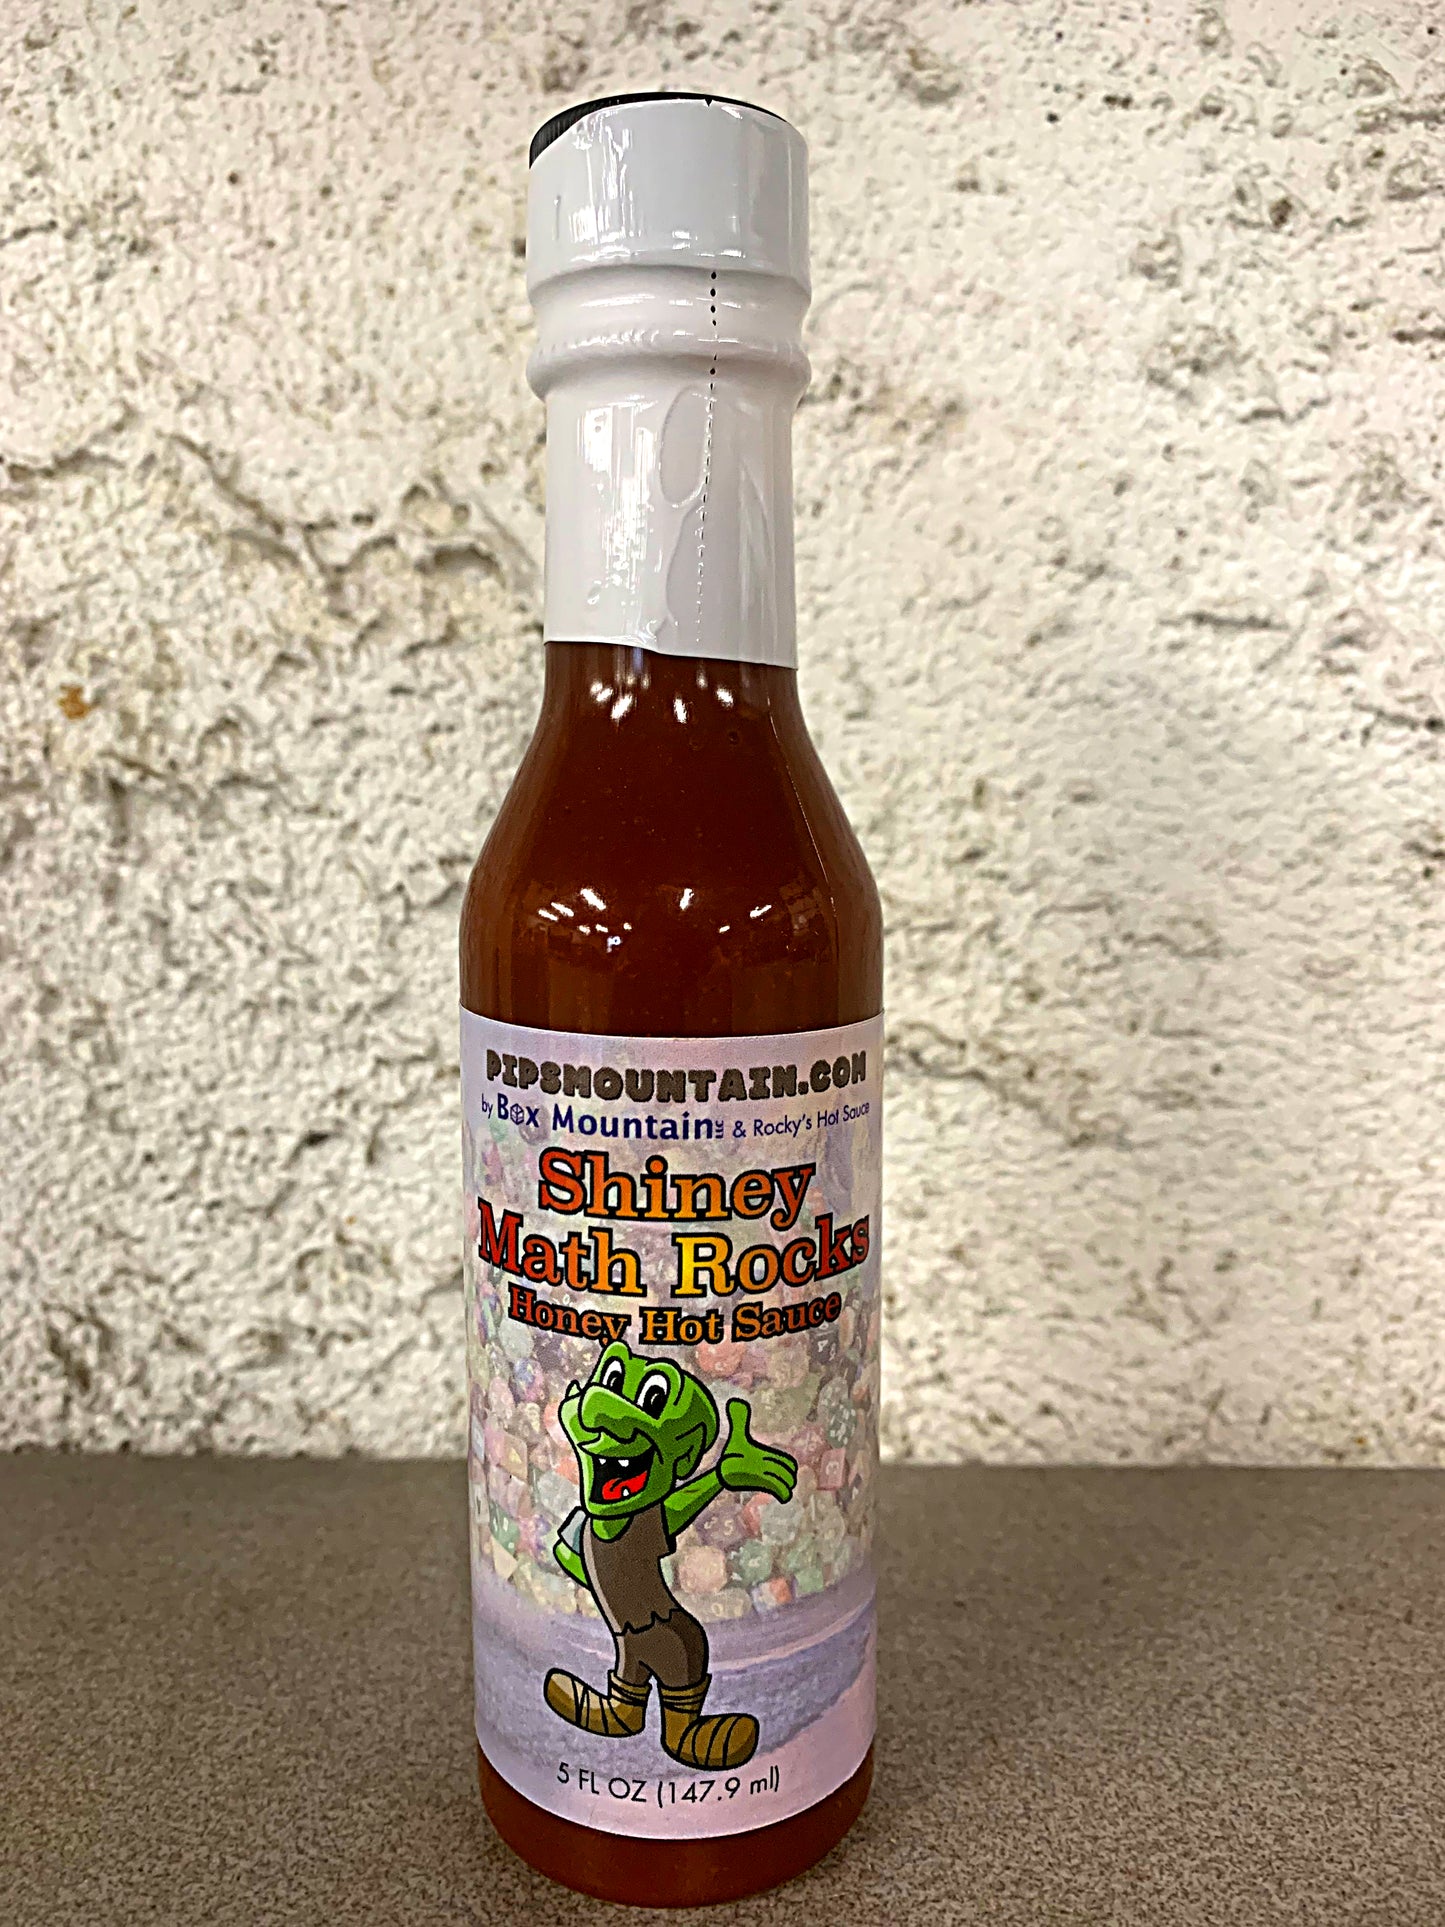 Pips Mountain Brand Hot Sauces